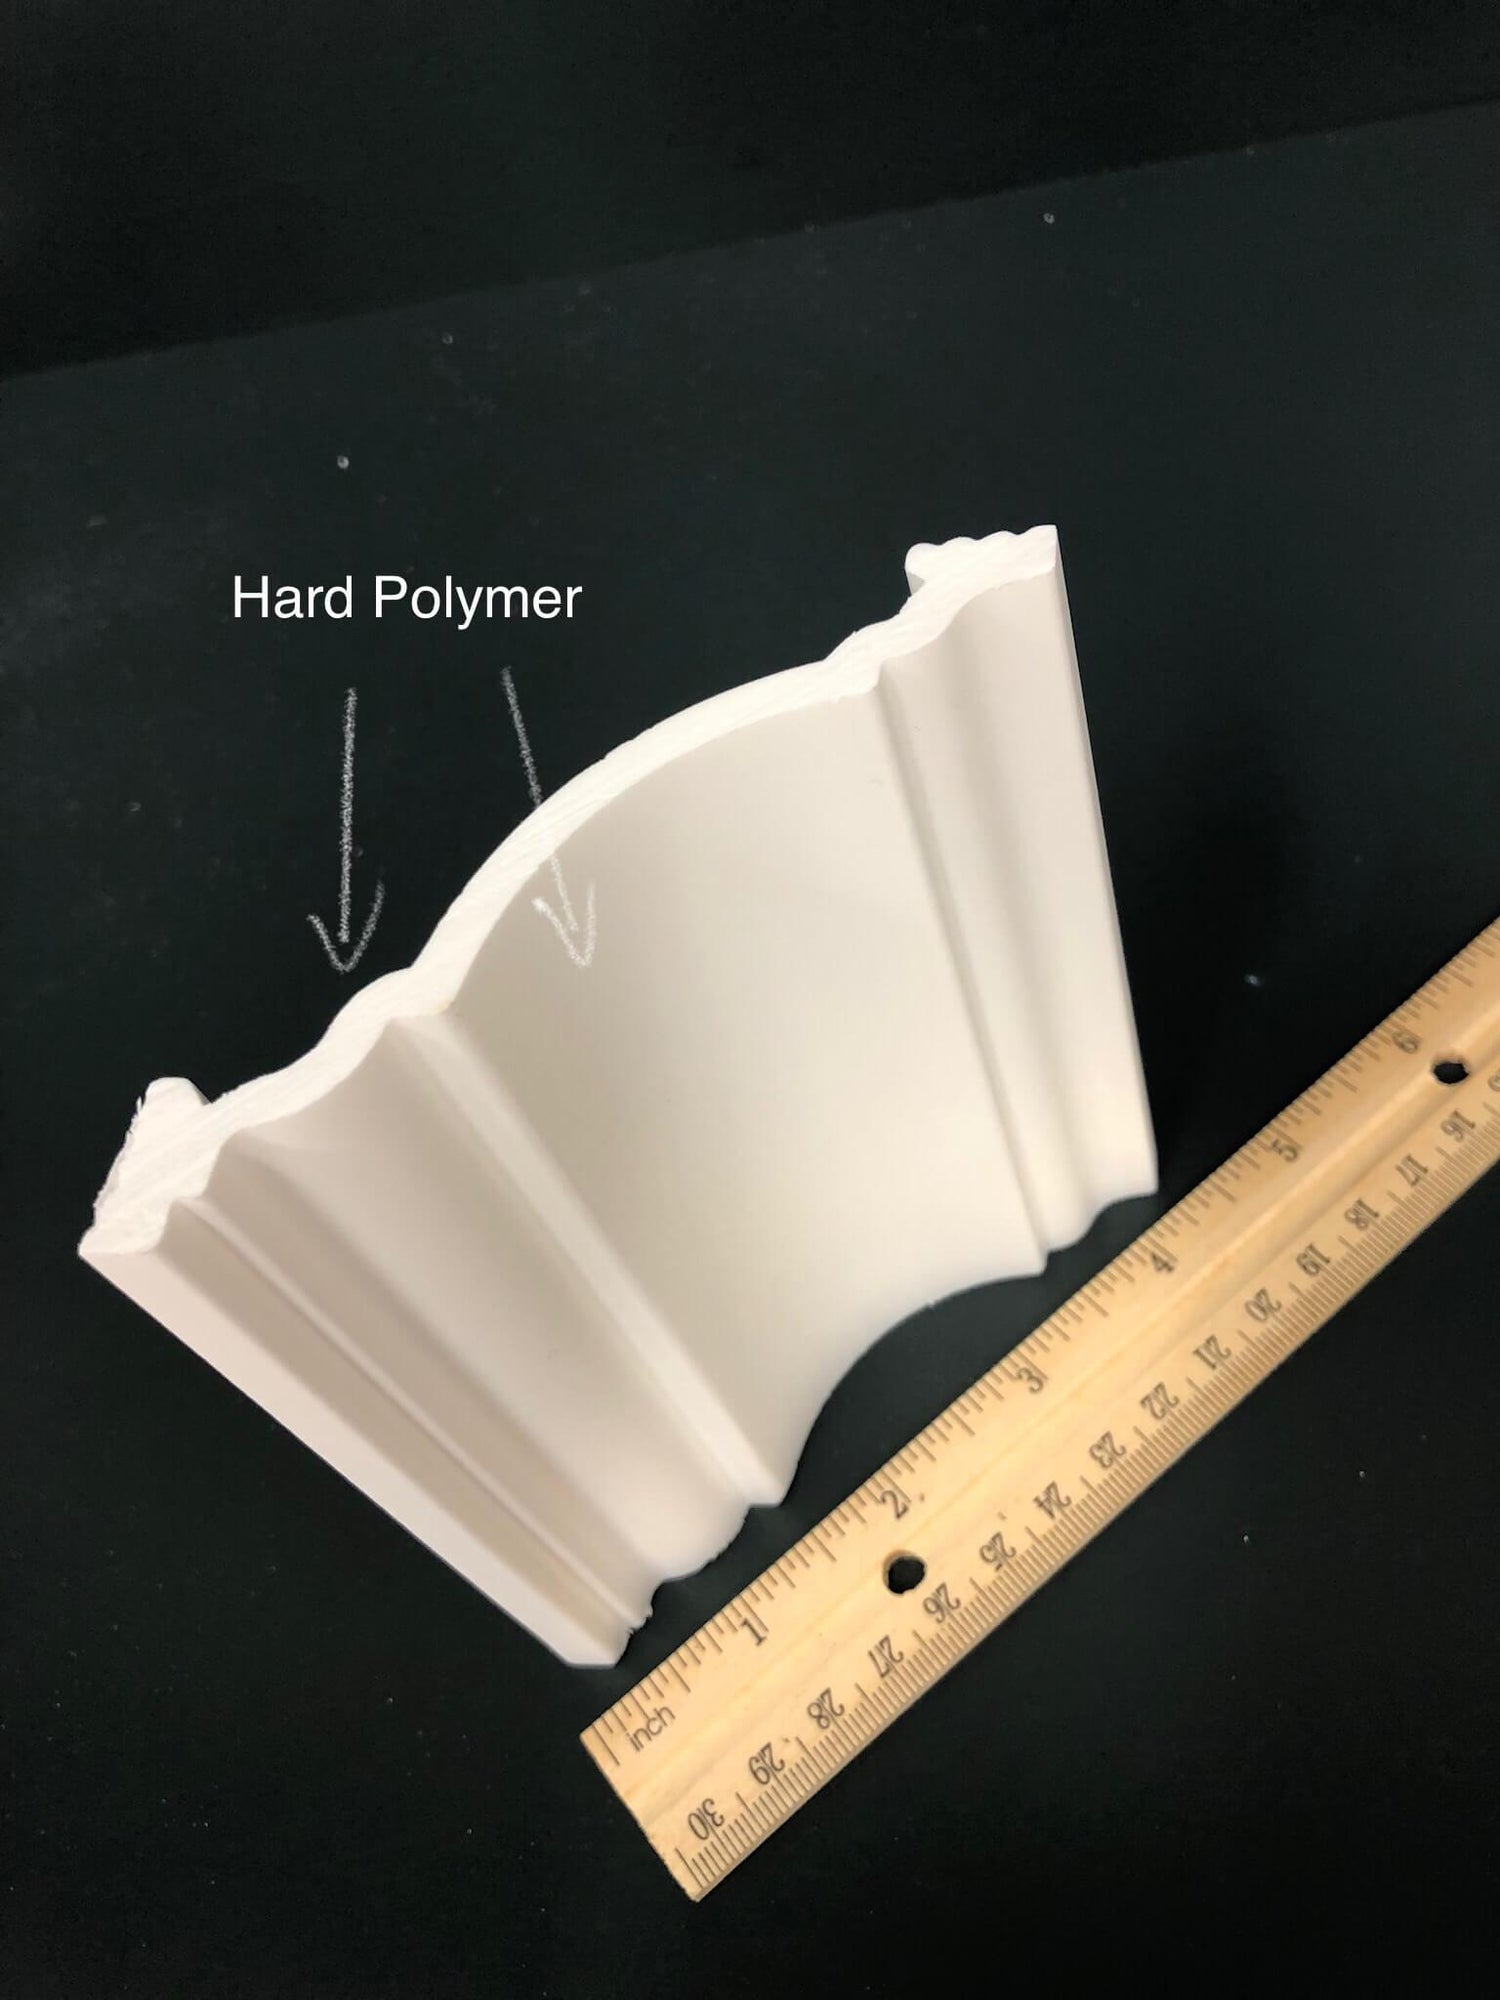 Atlanta - Lightweight Coving measured by a ruler